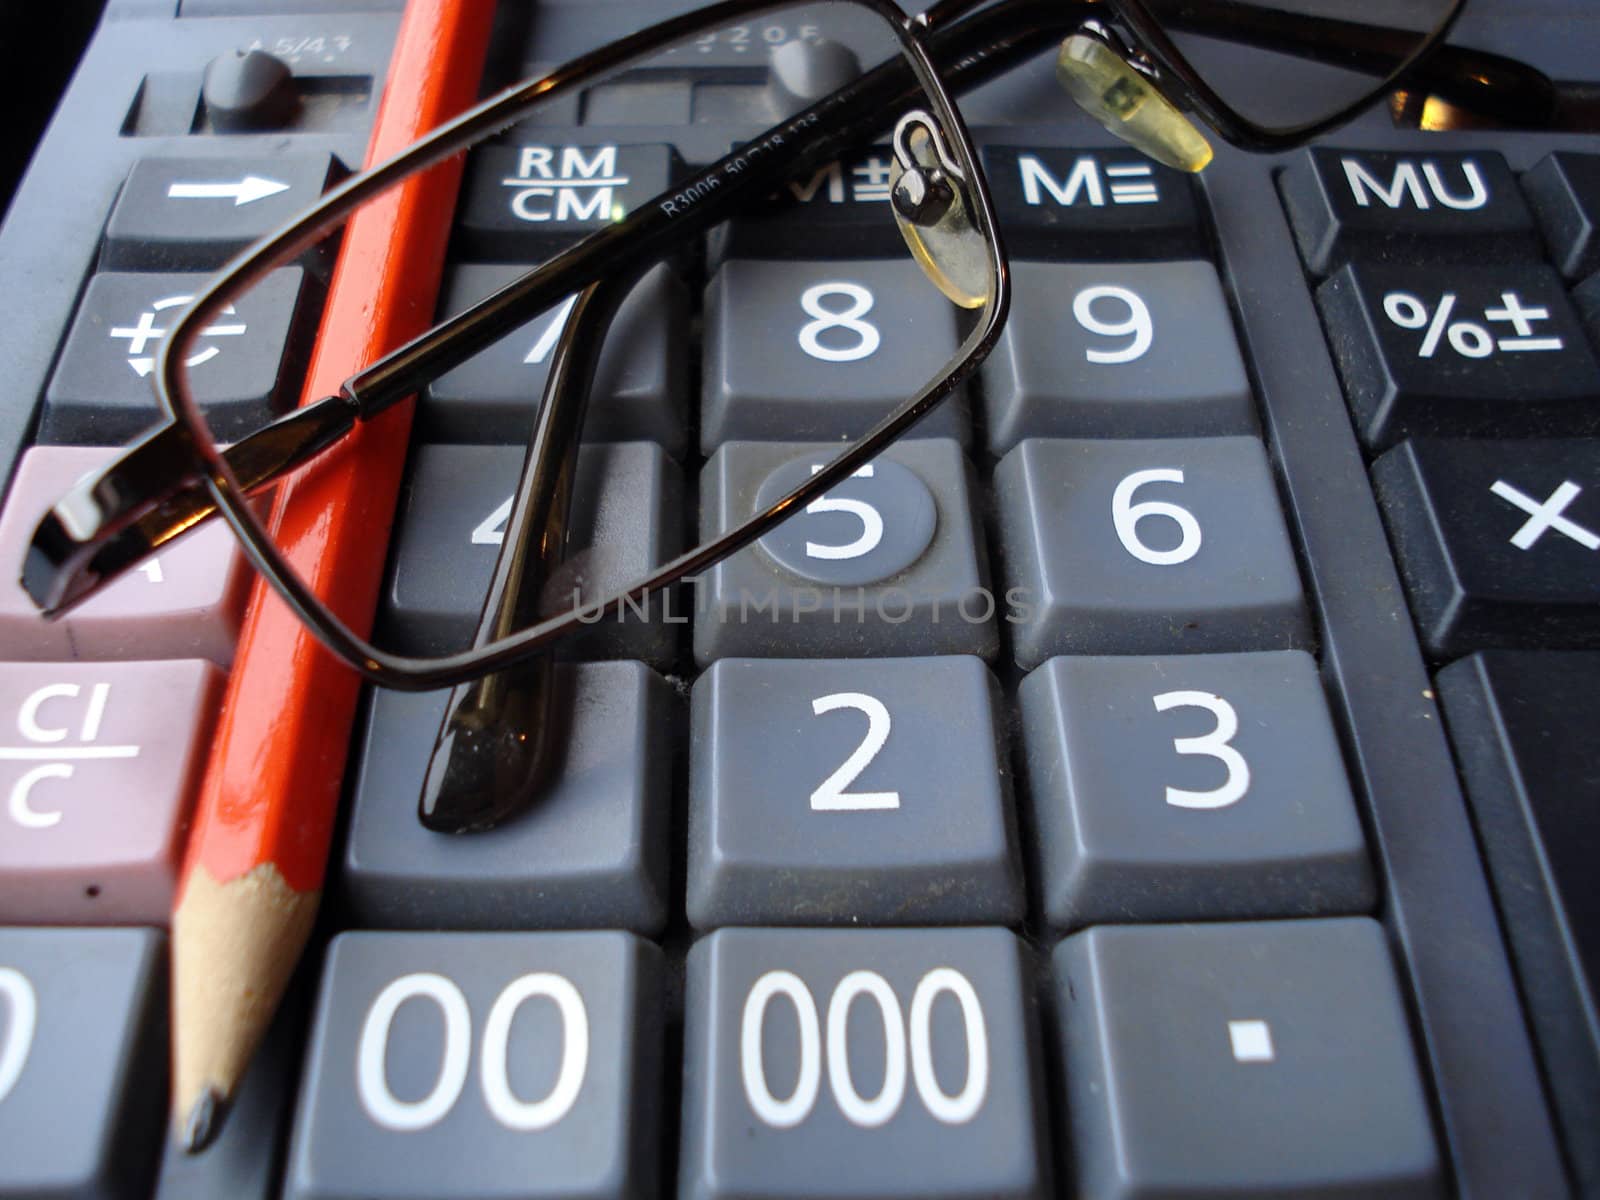 calculator, pen, glasses and some calculations